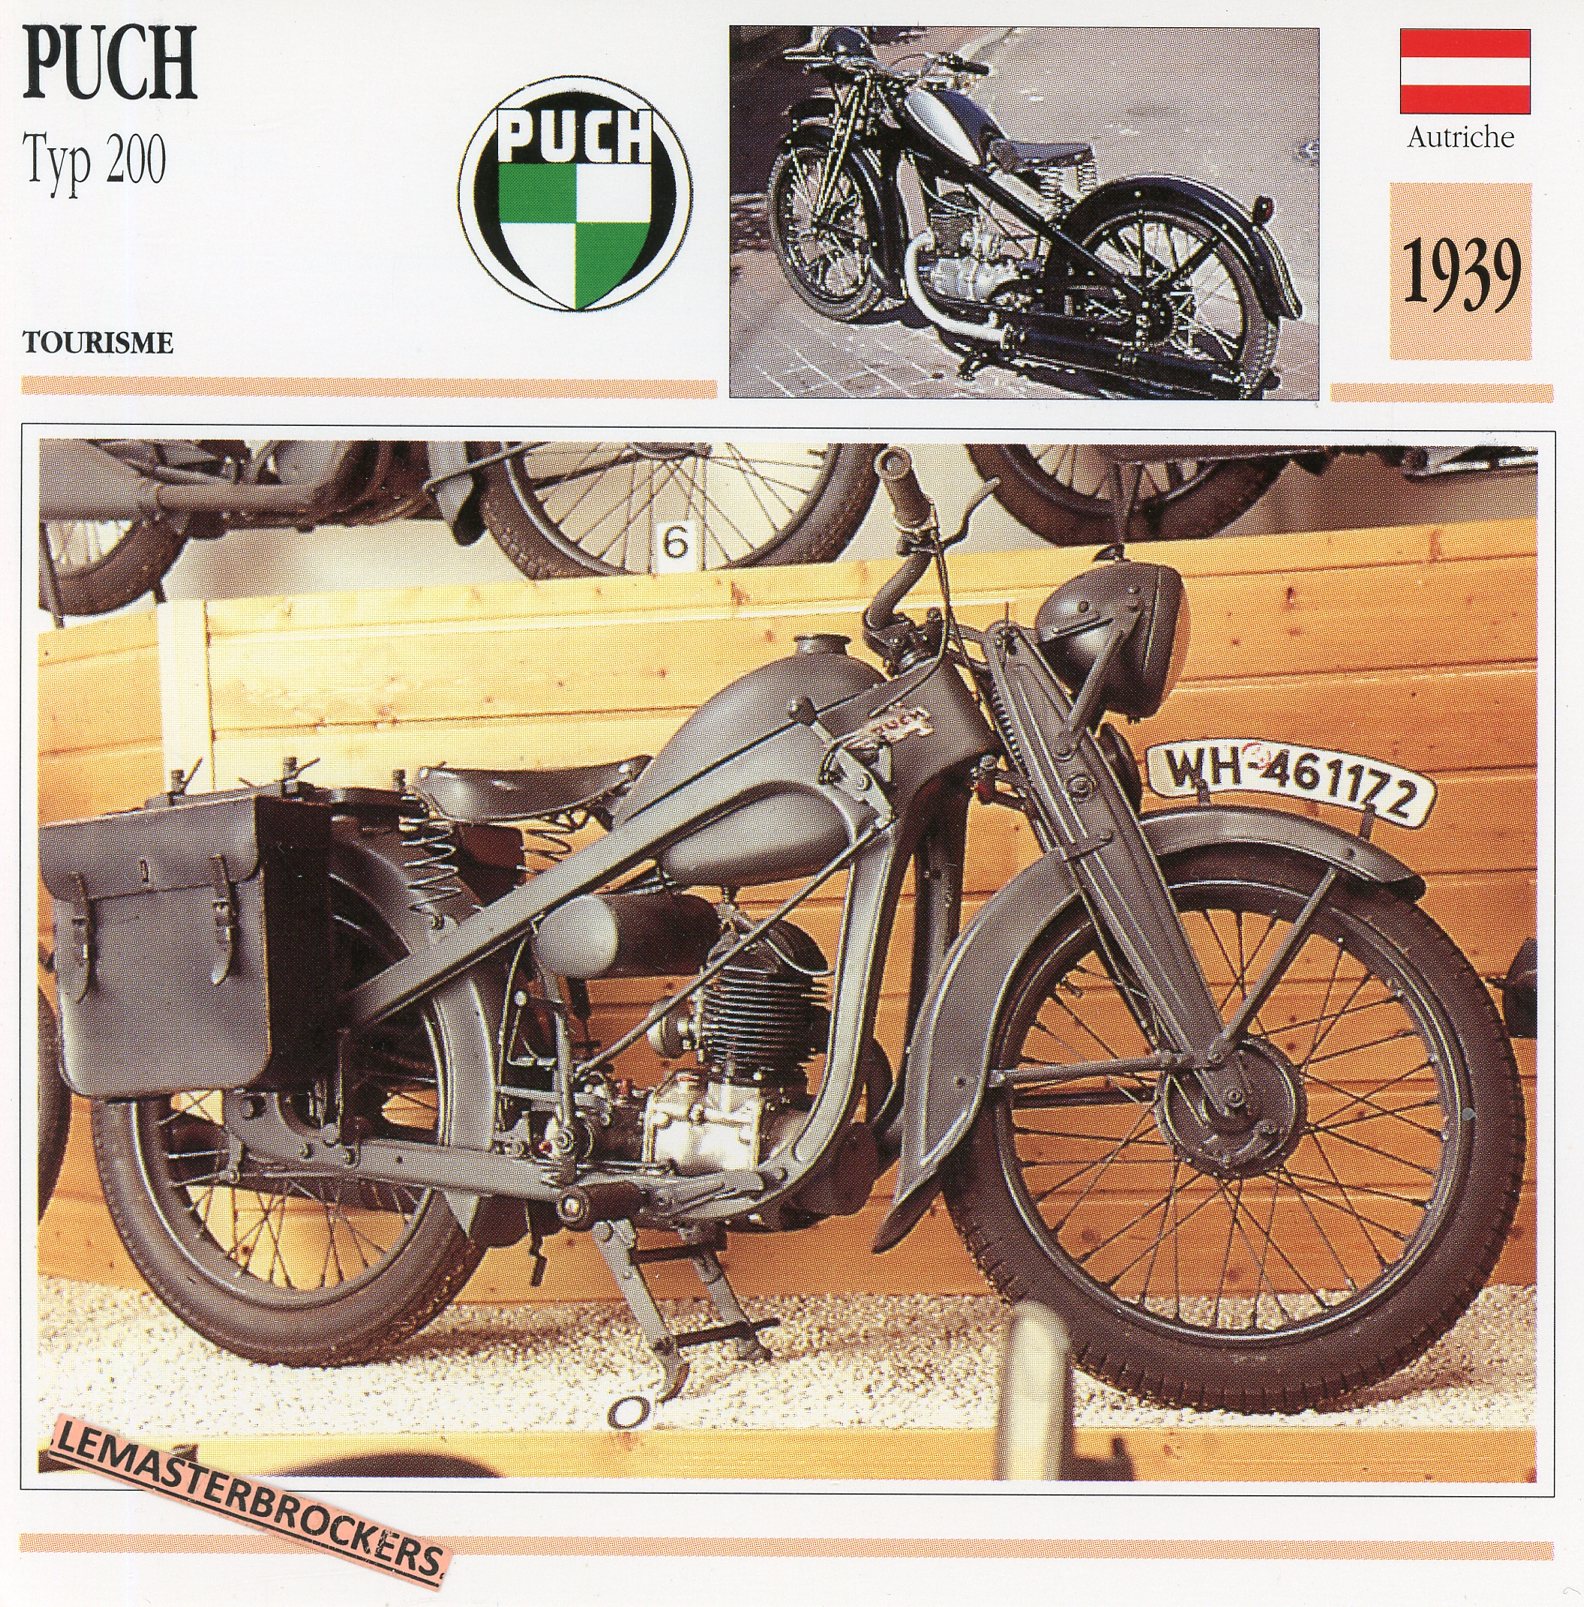 MOTO-PUCH-200-1939-FICHE-MOTO-MOTORCYCLE-CARDS-ATLAS-LEMASTERBROCKERS